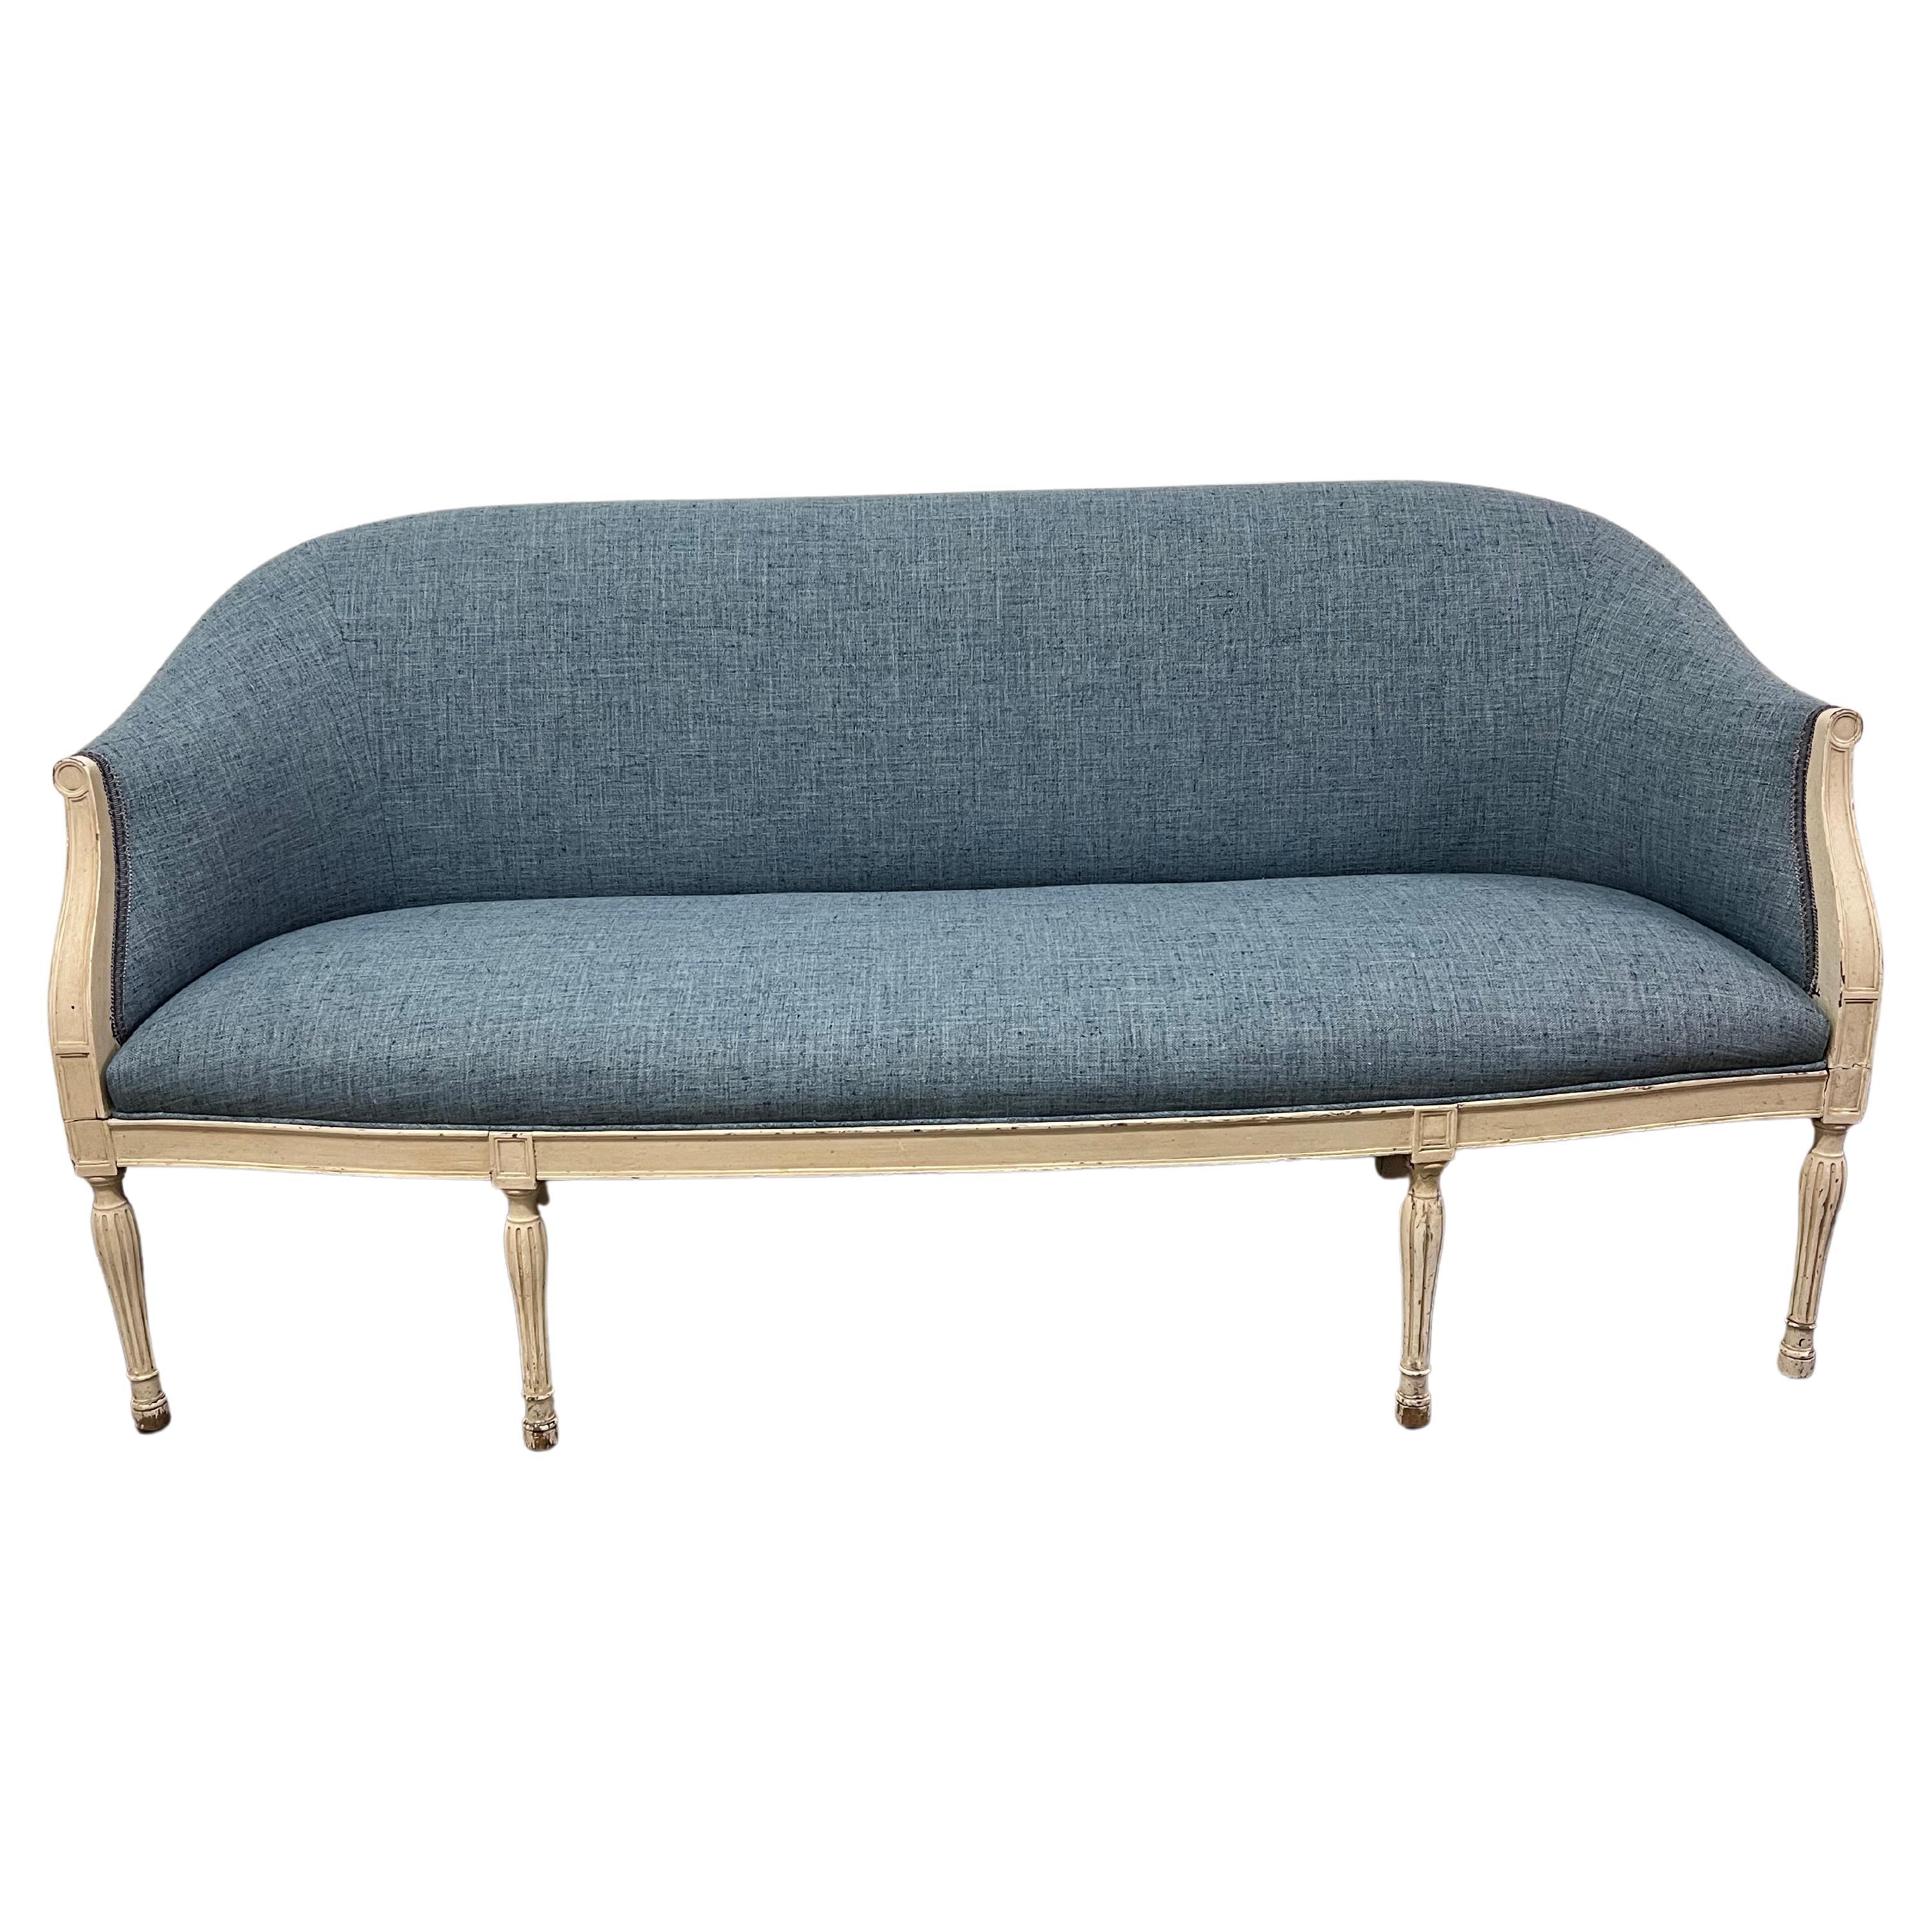 Lacquered Upholstered Louis XVI Style Patinated Wood Frame Sofa  For Sale